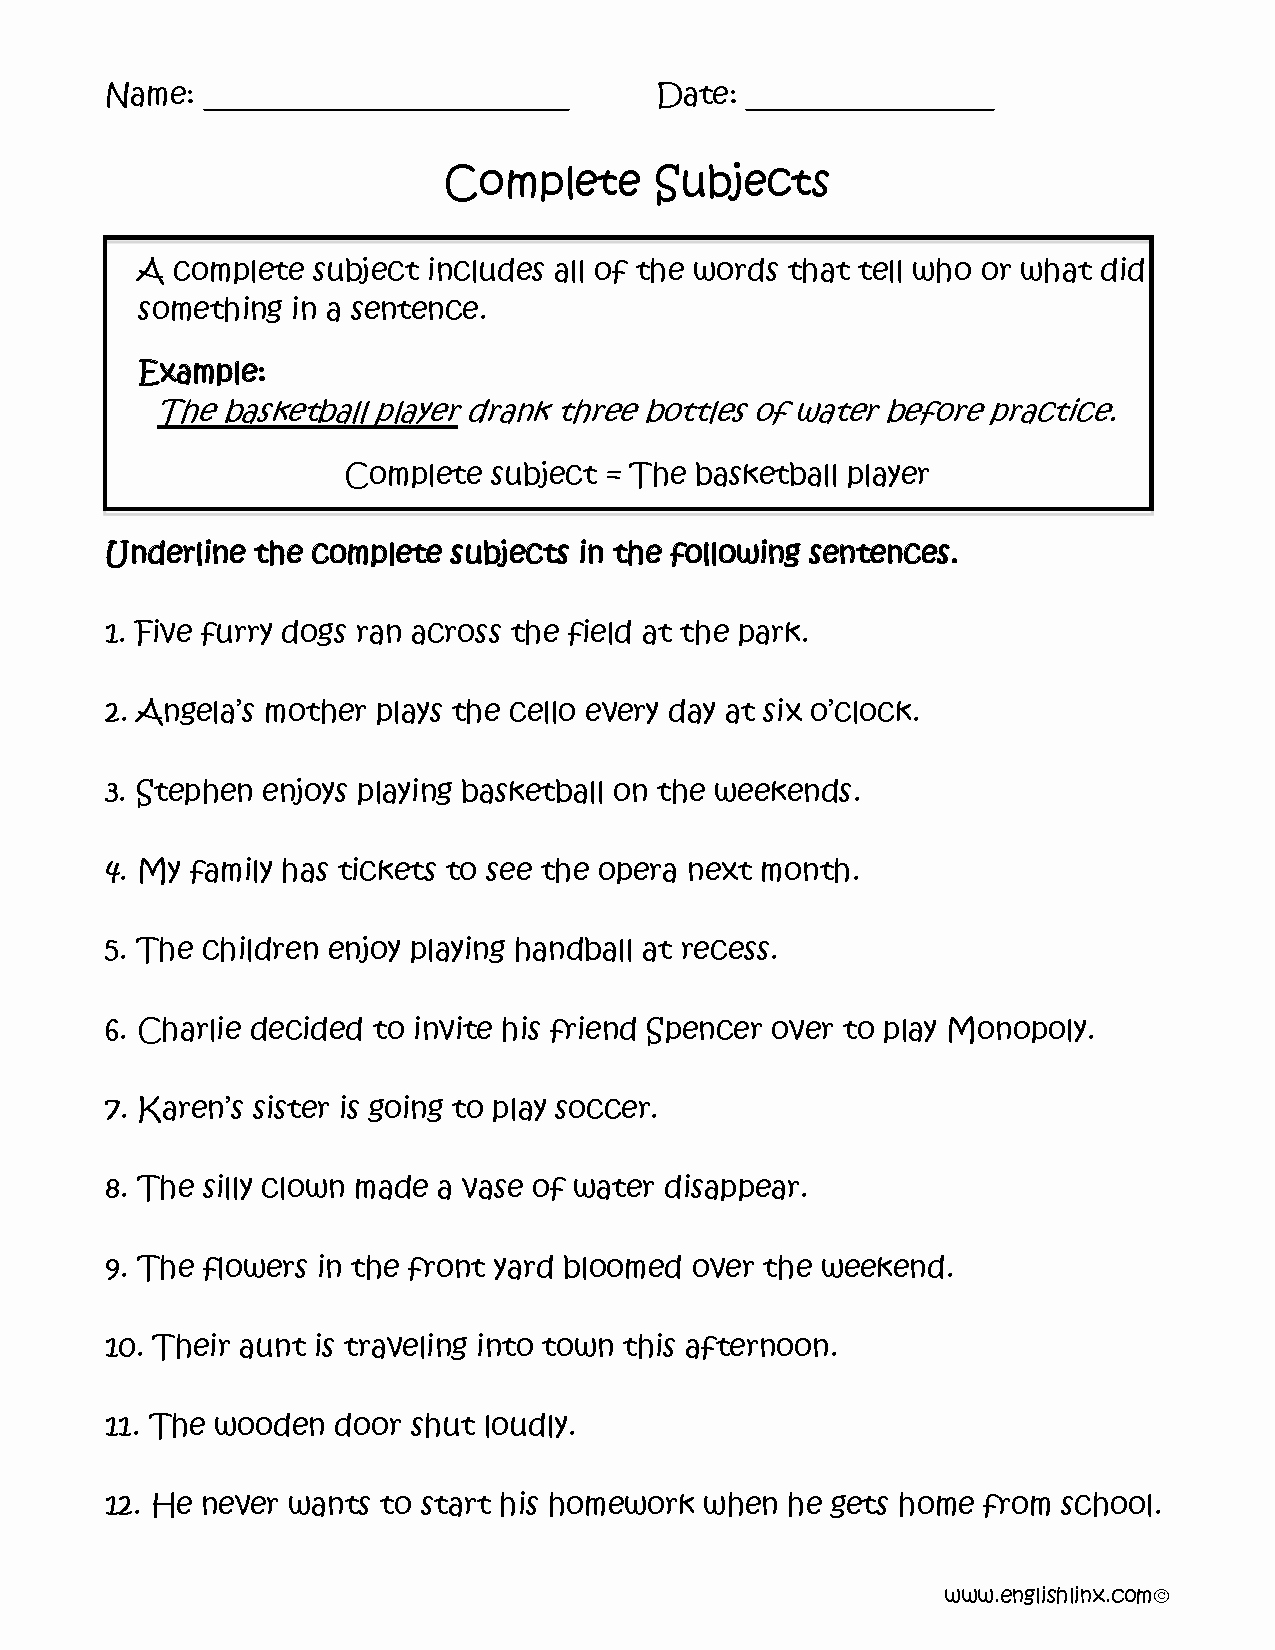 Subjects and Predicates Worksheet Best Of Plete Subjects Worksheets